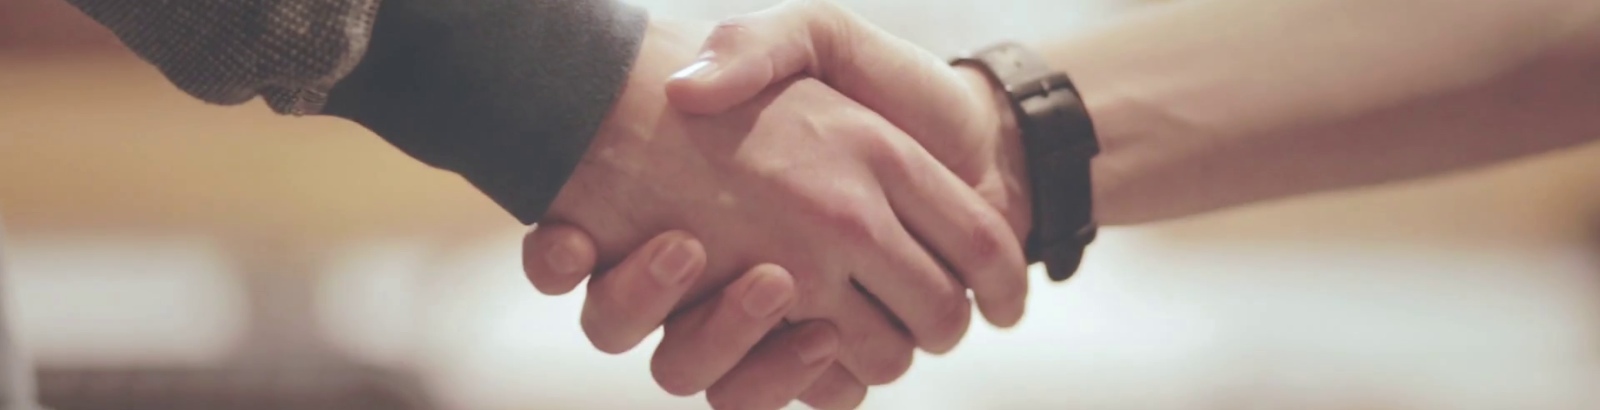 two people engaged in a handshake